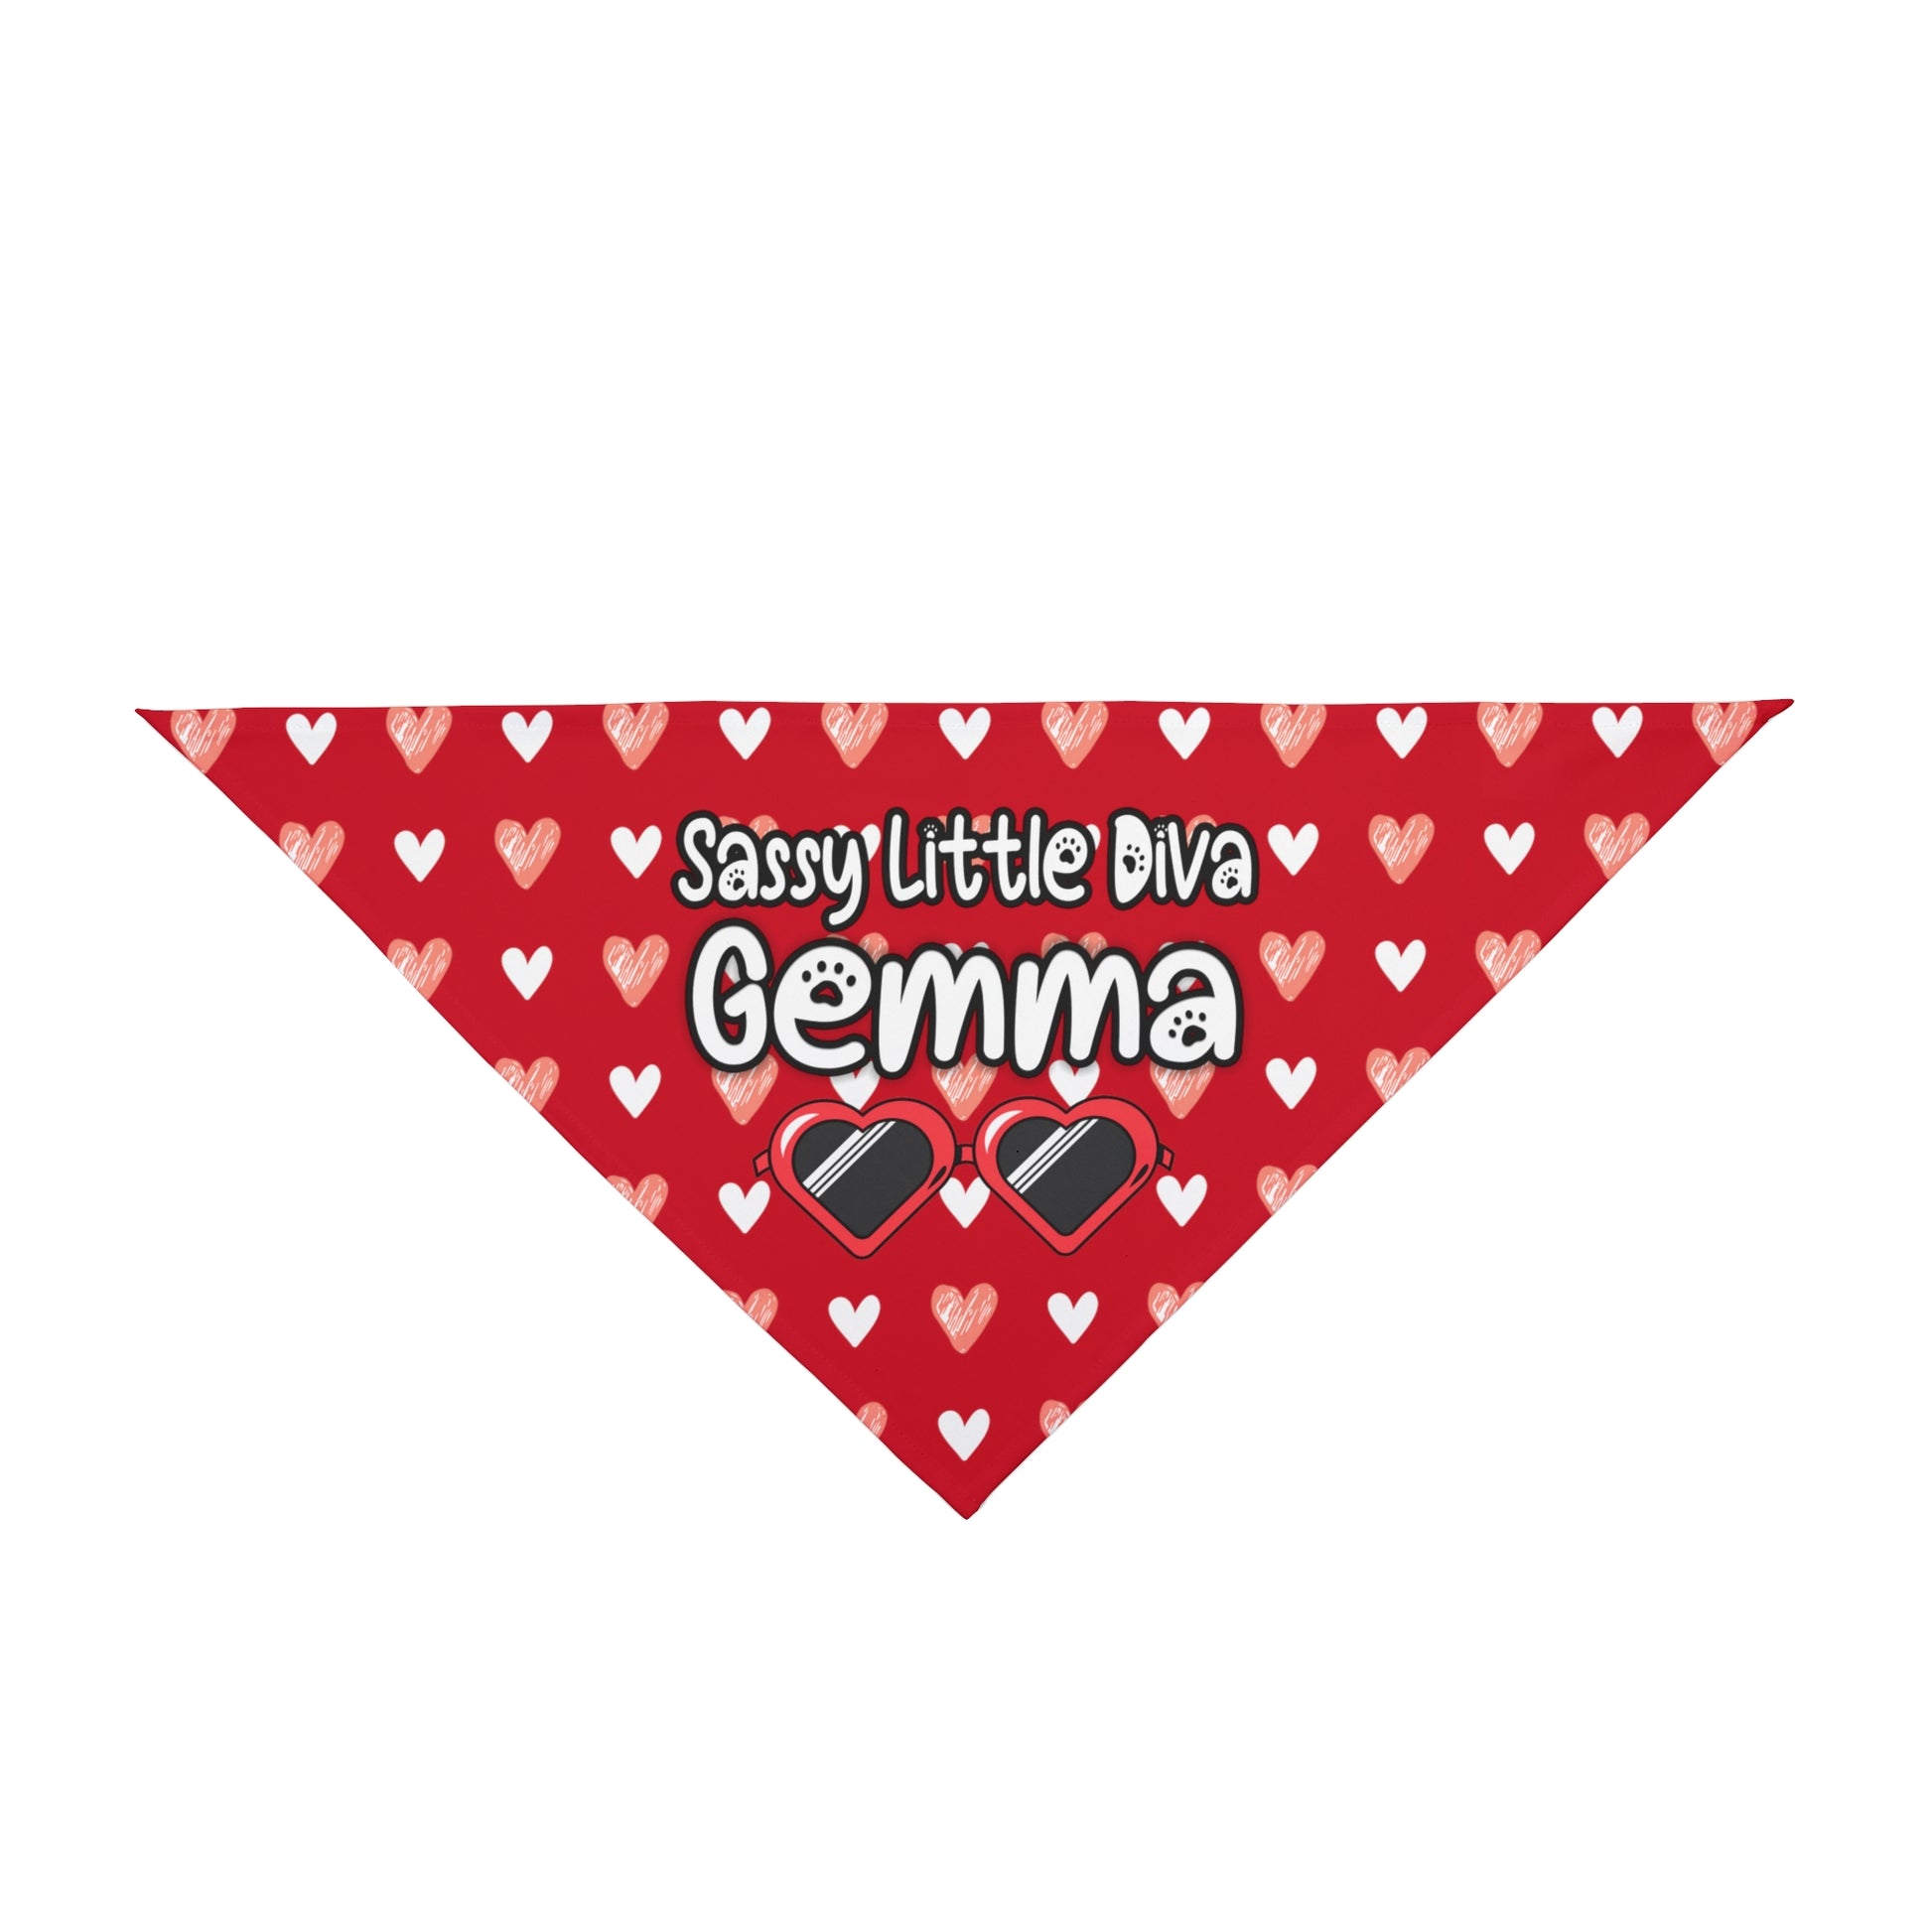 A pet bandana with a beautiful hearts pattern design with a message that says: "Little Diva Gemma" and sun glasses. Bandana's Color is red